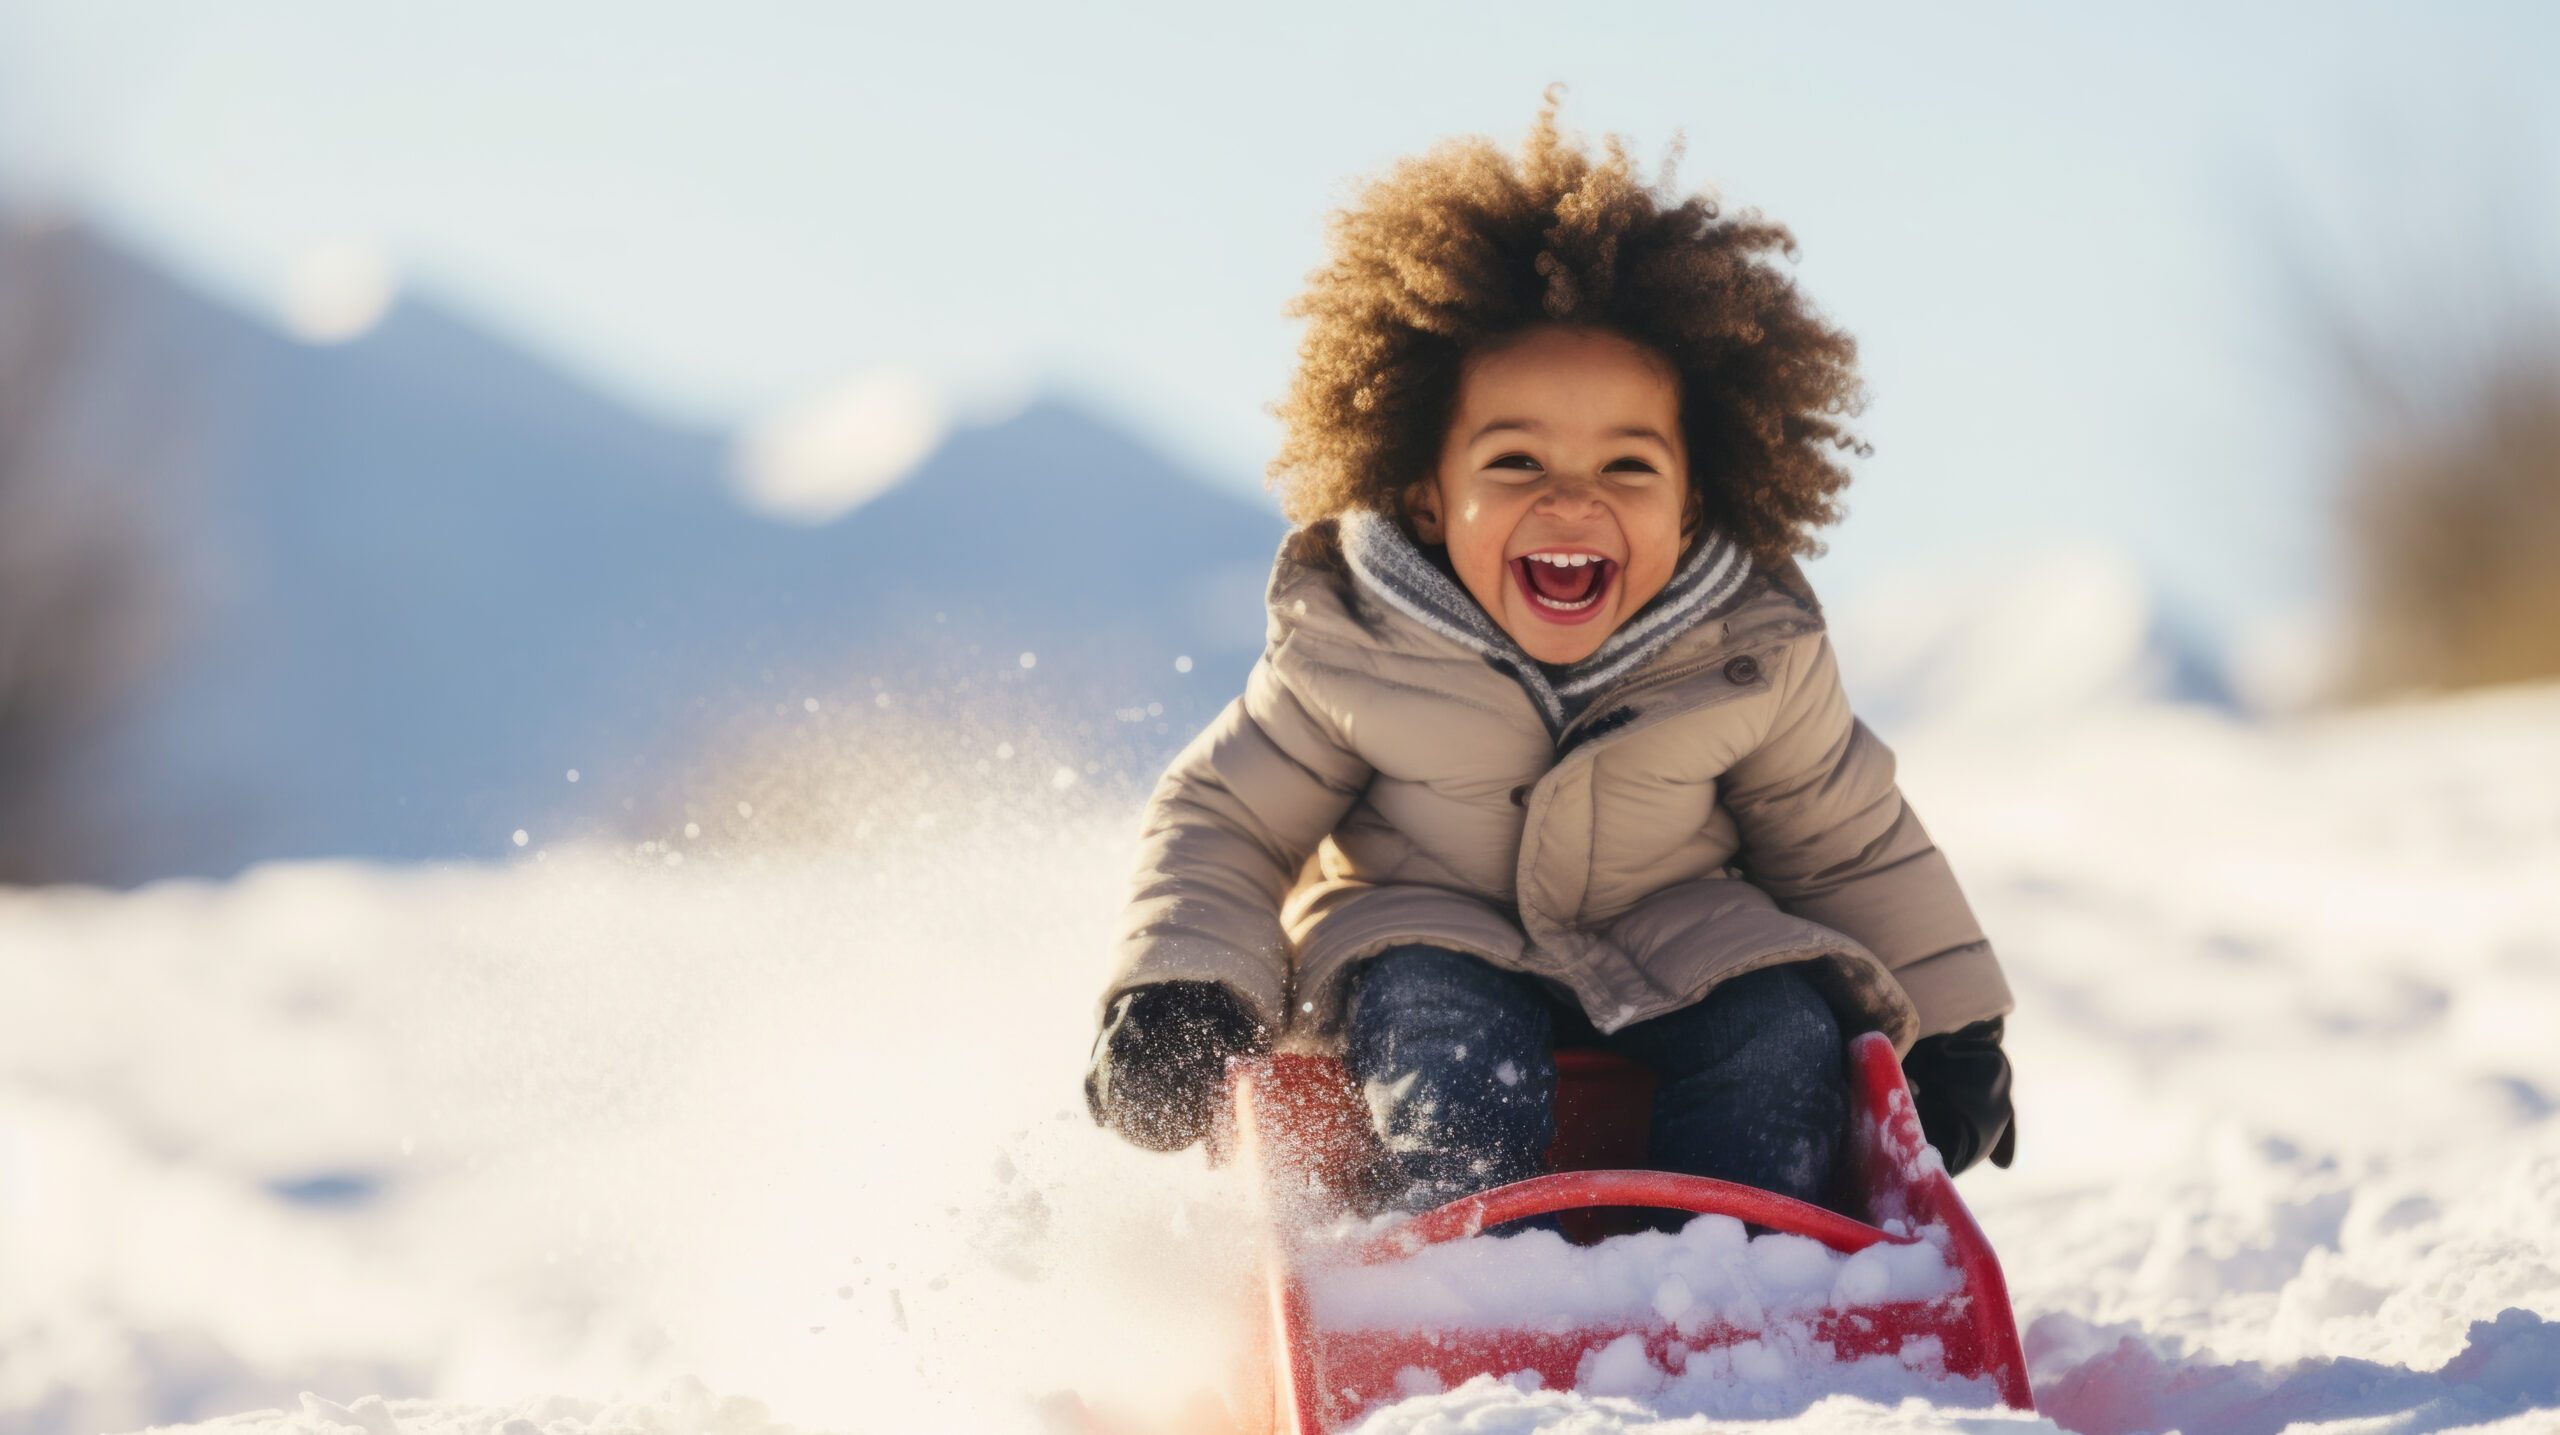 Cold does not cause colds. A happy child sleds through the snow. Enjoy your winter.